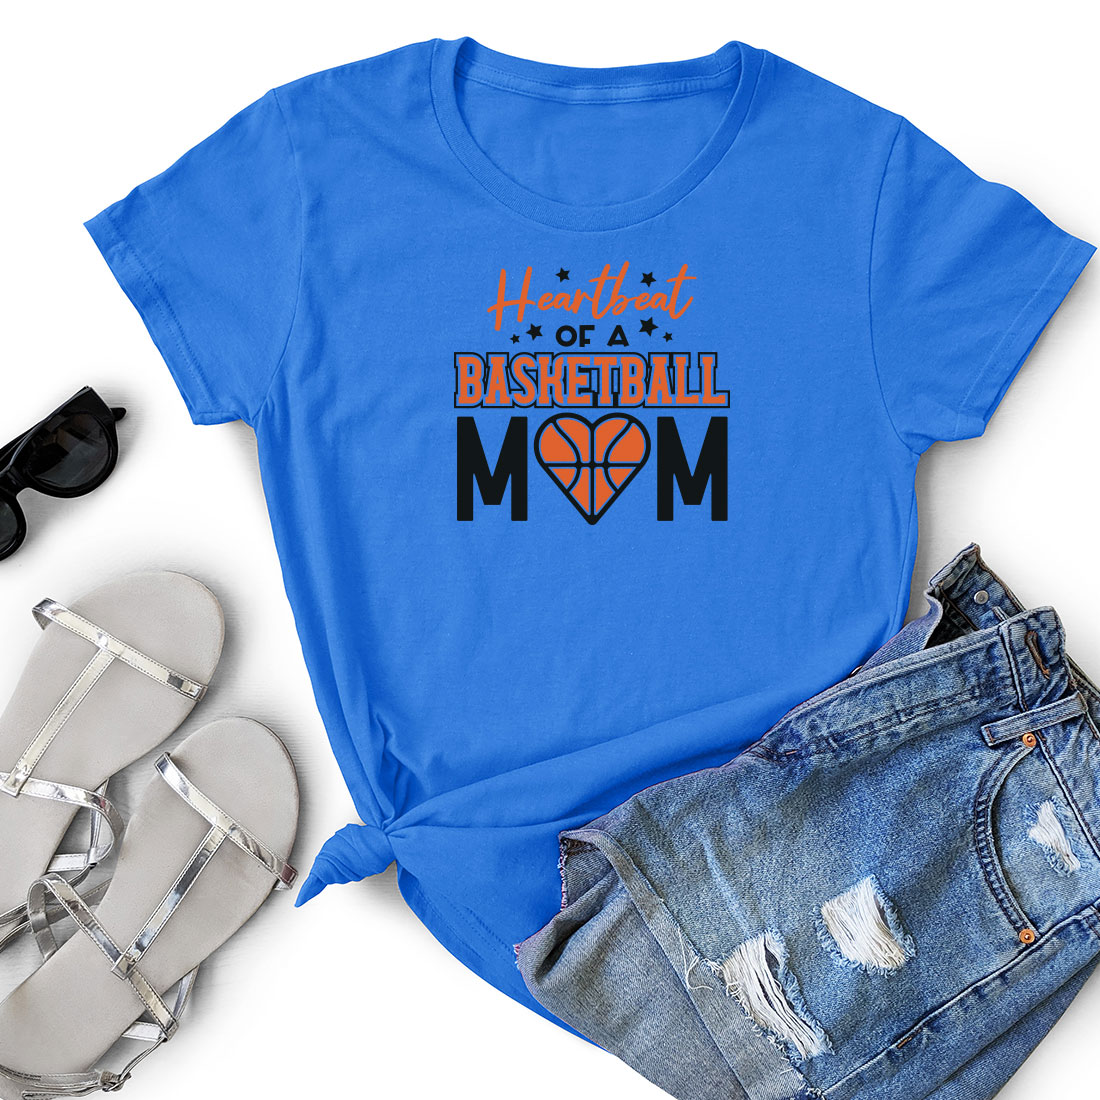 Blue shirt with a basketball mom on it.